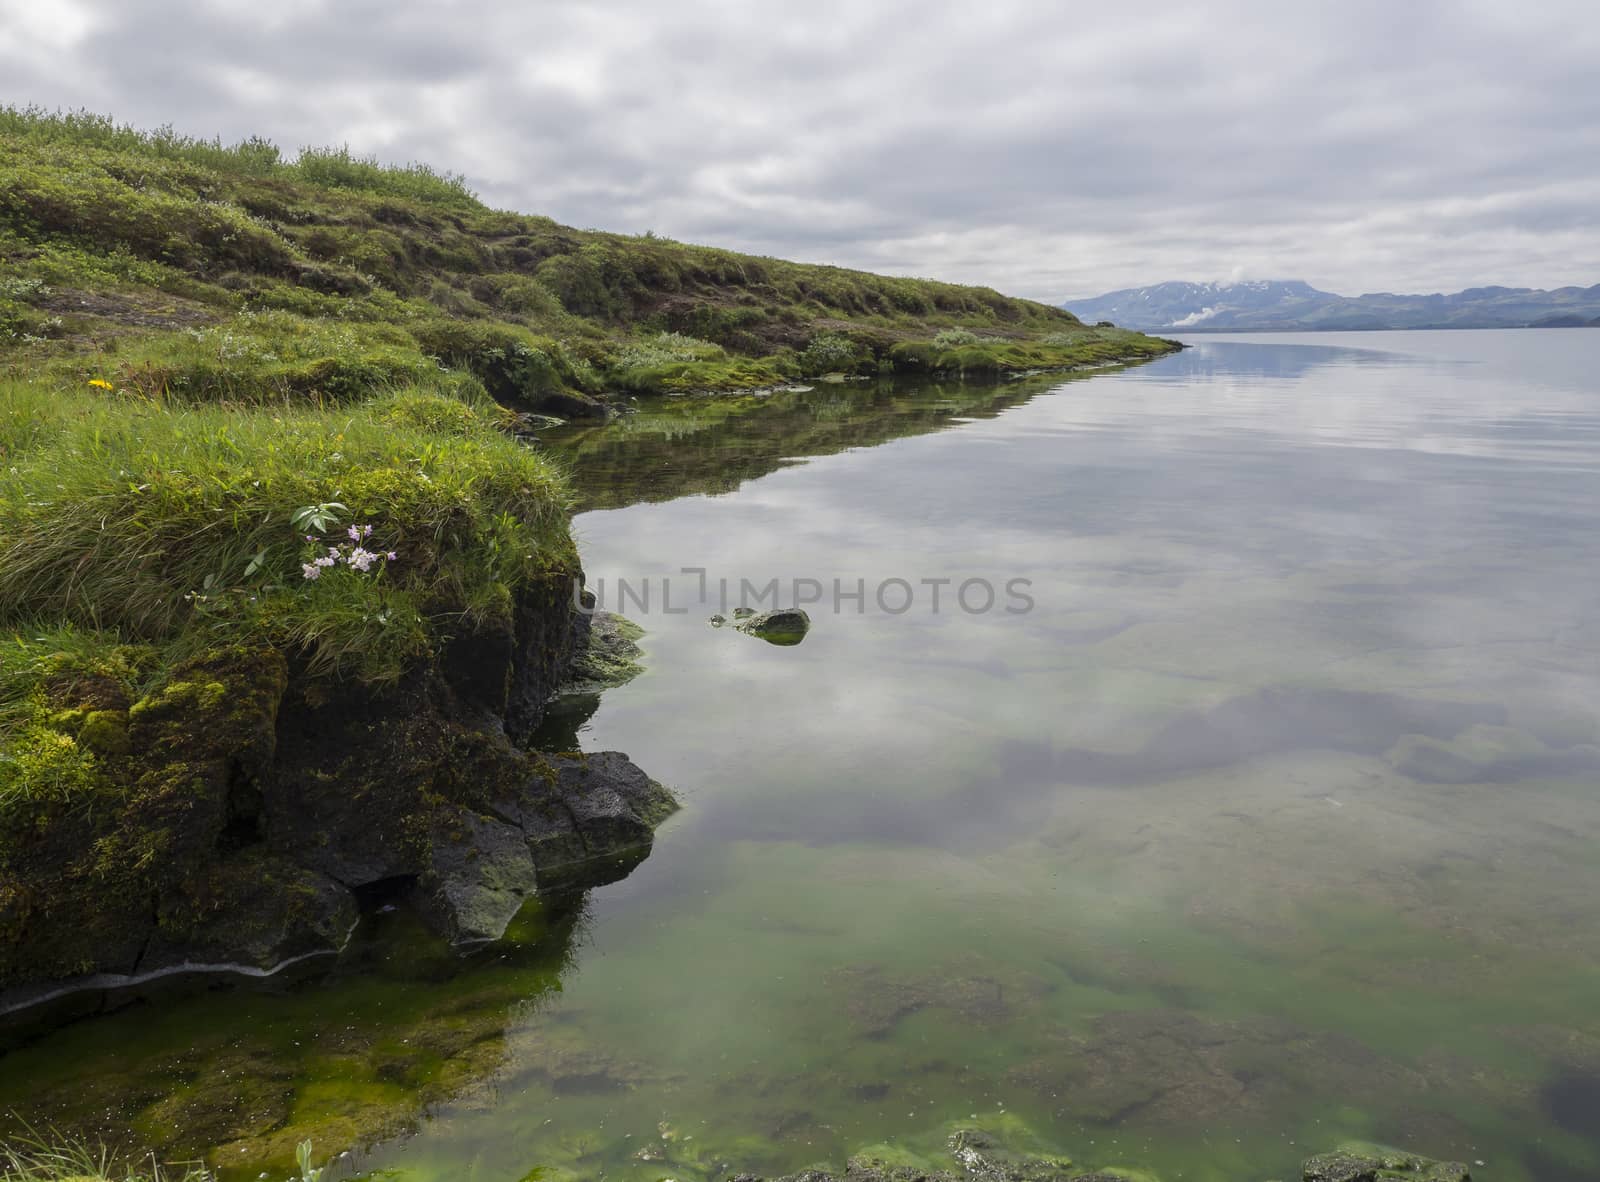 grassy bank of thingvallavatn lake with crystal clear water, green moss and steaming hills, moody sky